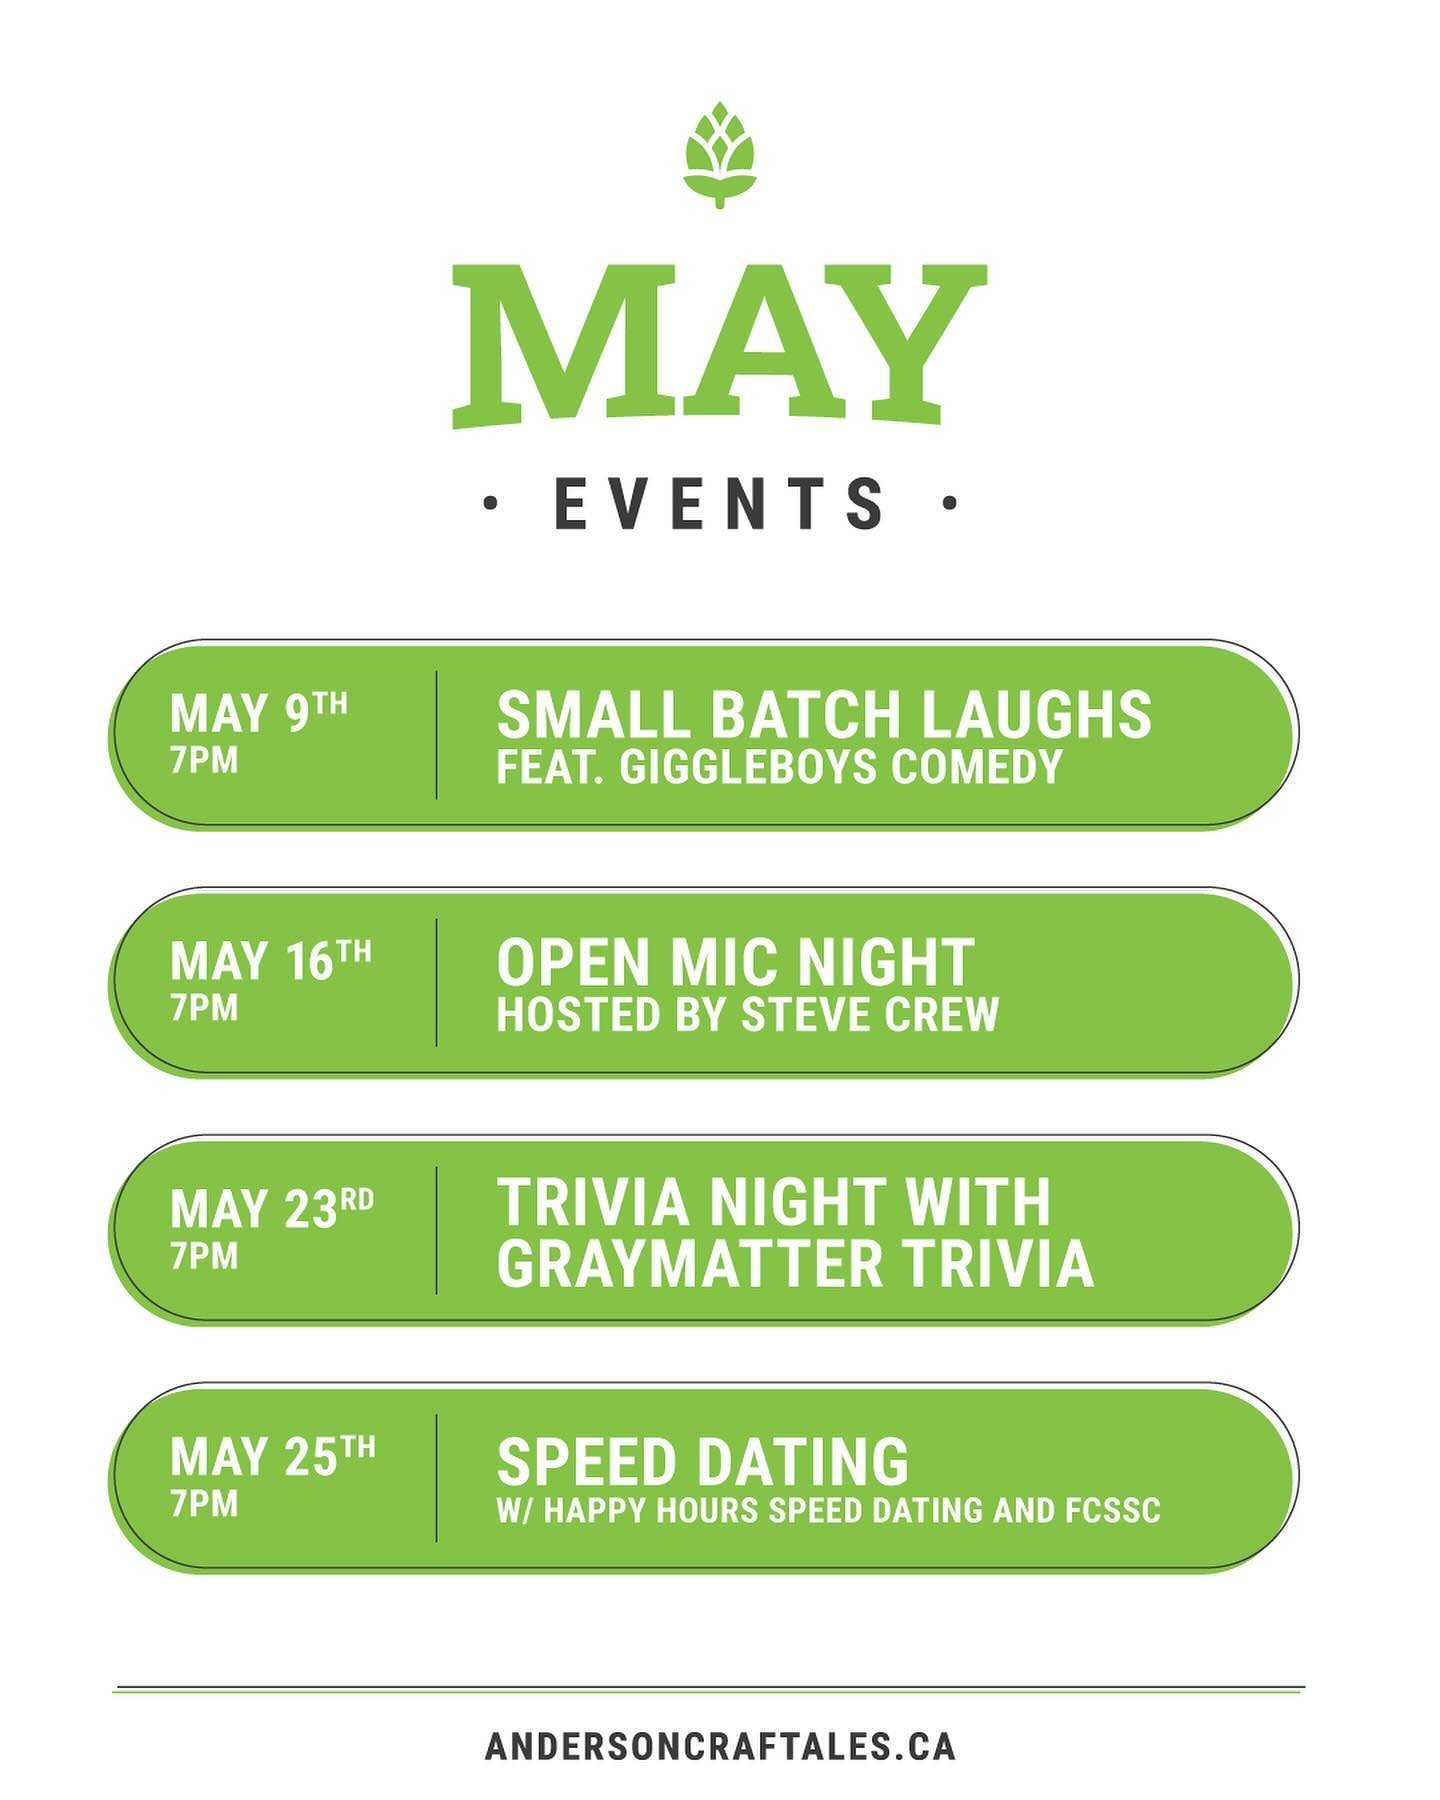 Lots going on this month!!! 

Catch some of our events this month! 
Feat. 
@giggleboyscomedy 
@graymattertriviaco 
@happyhourshamont 

Edit!!: This months speed dating is being run solo not in partnership with FCSSC! 
So sign up directly through @hap